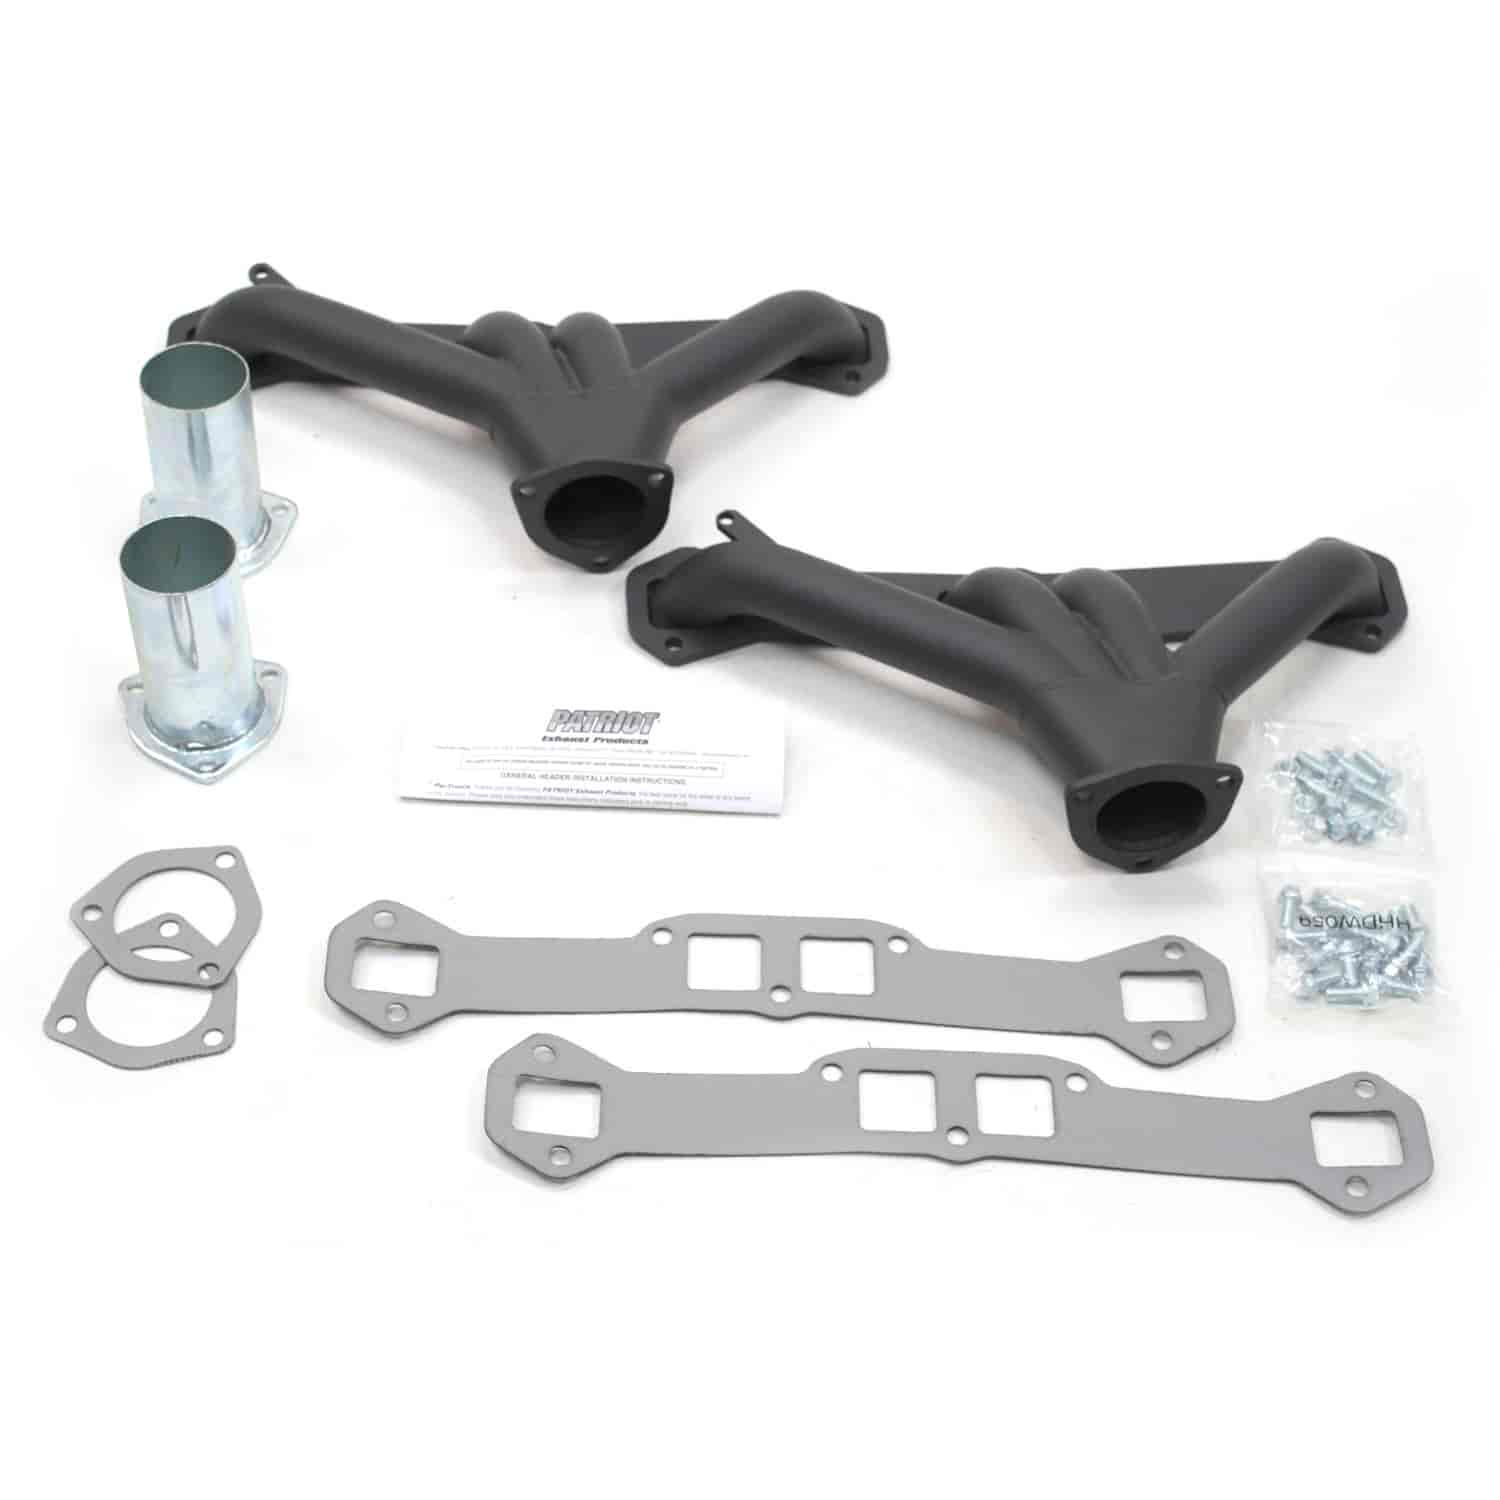 Tight Tuck Headers Chevy 348-409 (Oval Ports)